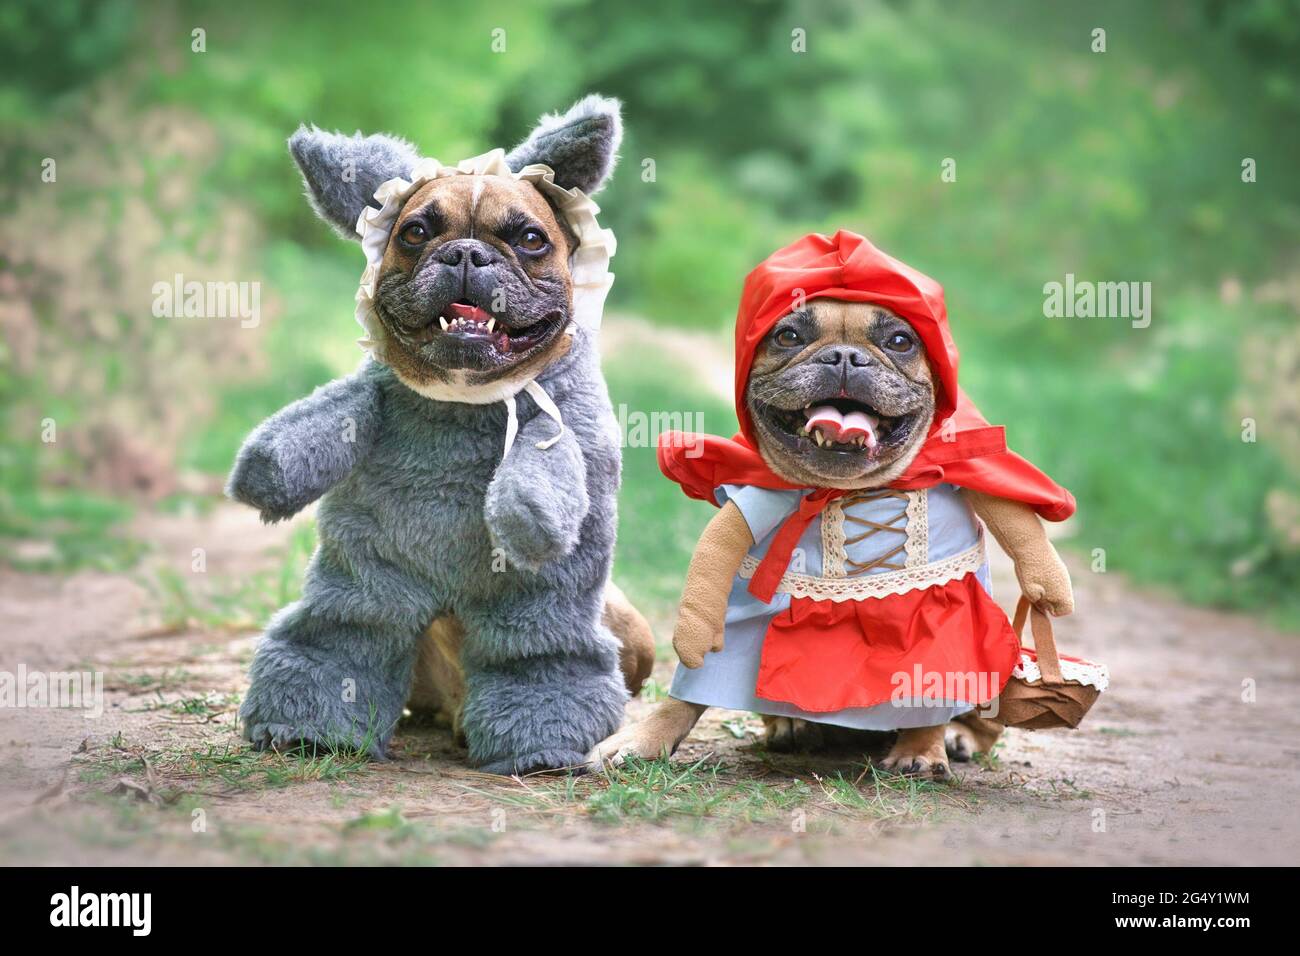 Pair of French Bulldog dogs dressed up as fairytale characters Little Red Riding Hood and Big Bad Wolf with full body costumes with fake arms standing Stock Photo